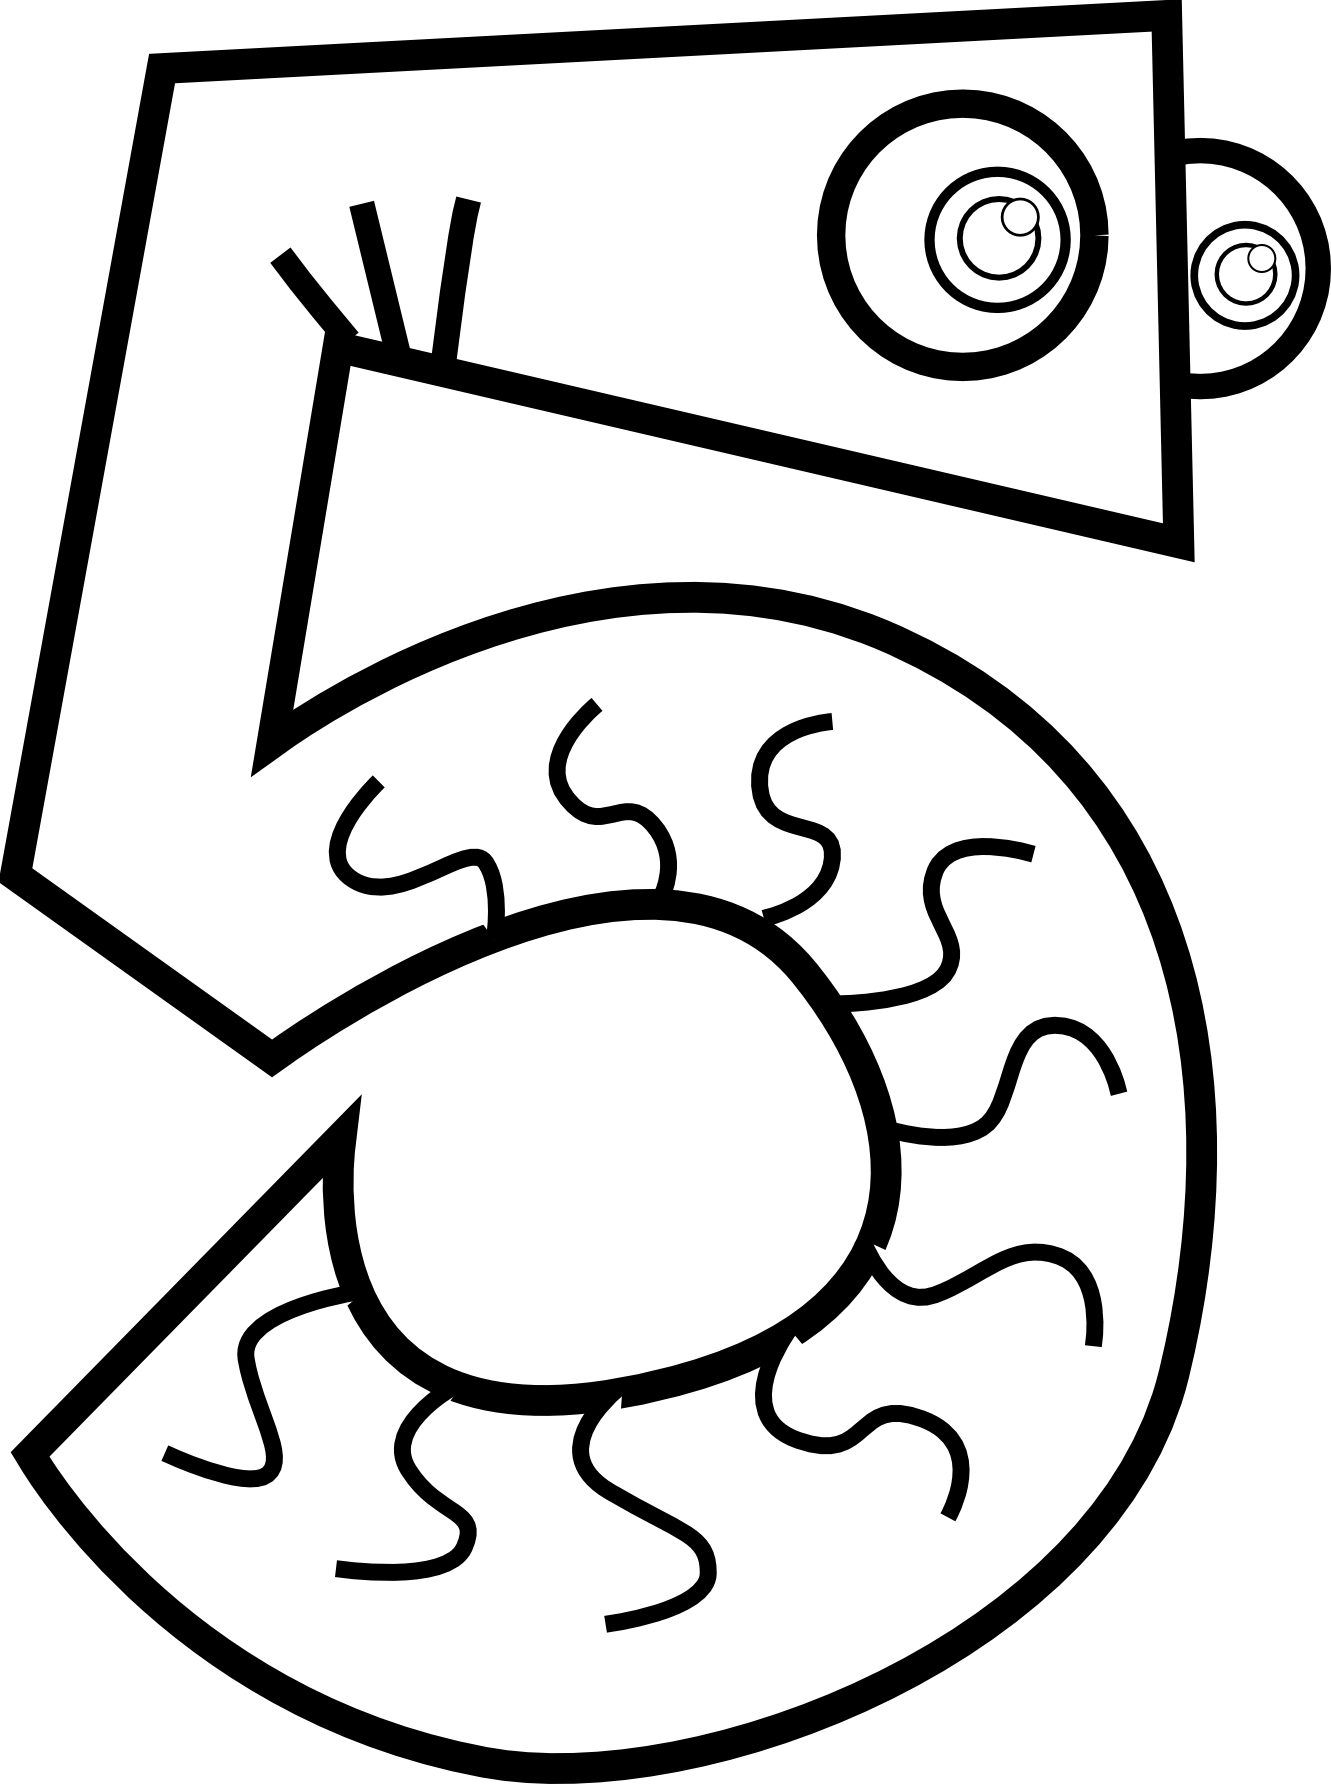 clipart numbers black and white - photo #2